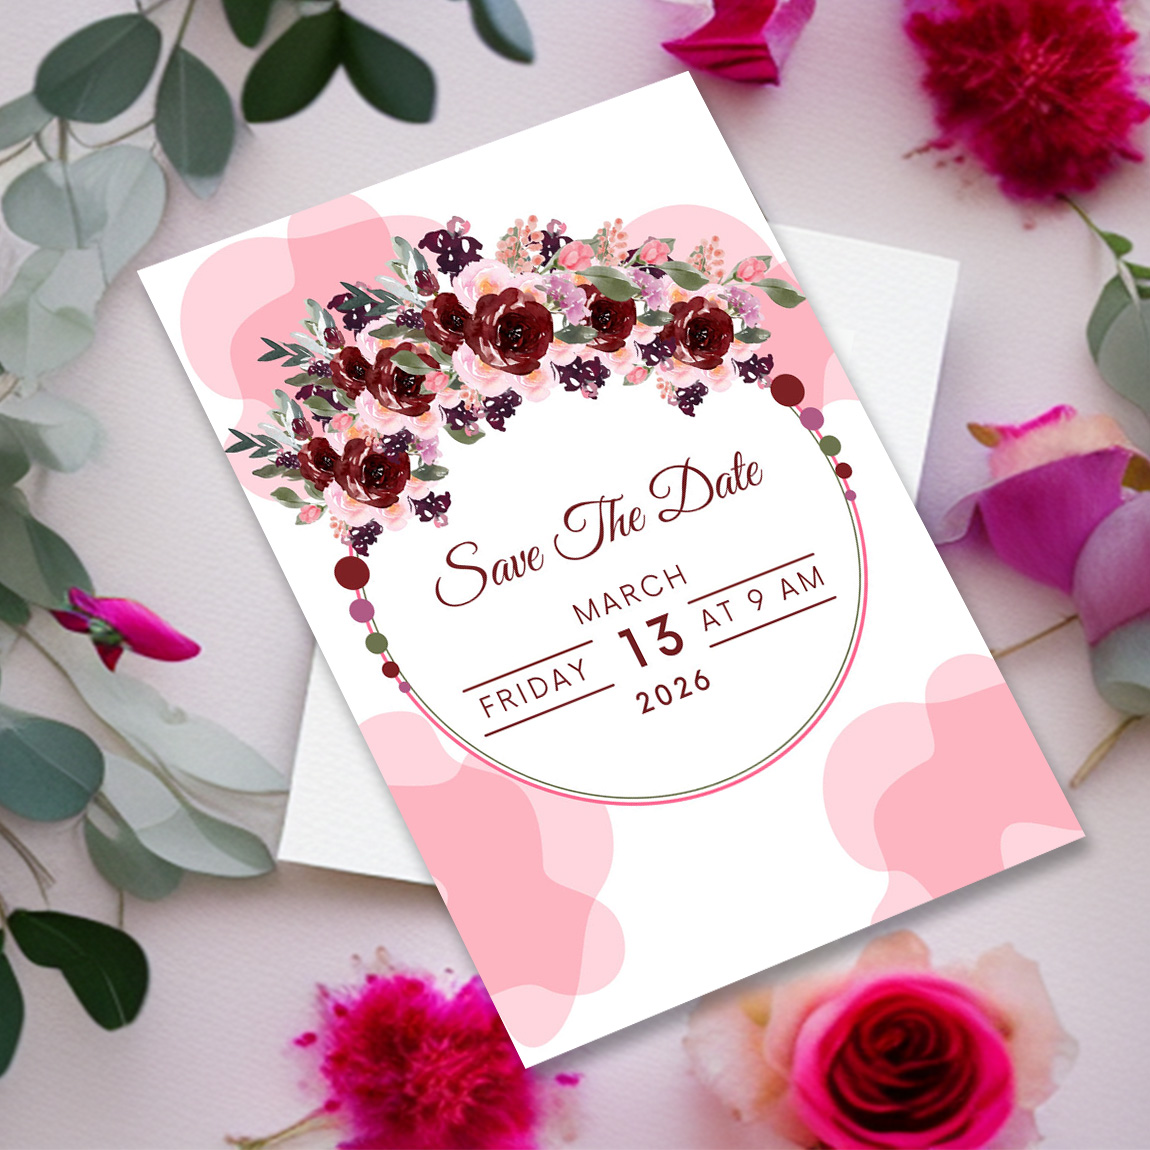 Image of an elegant pink wedding invitation with flowers.